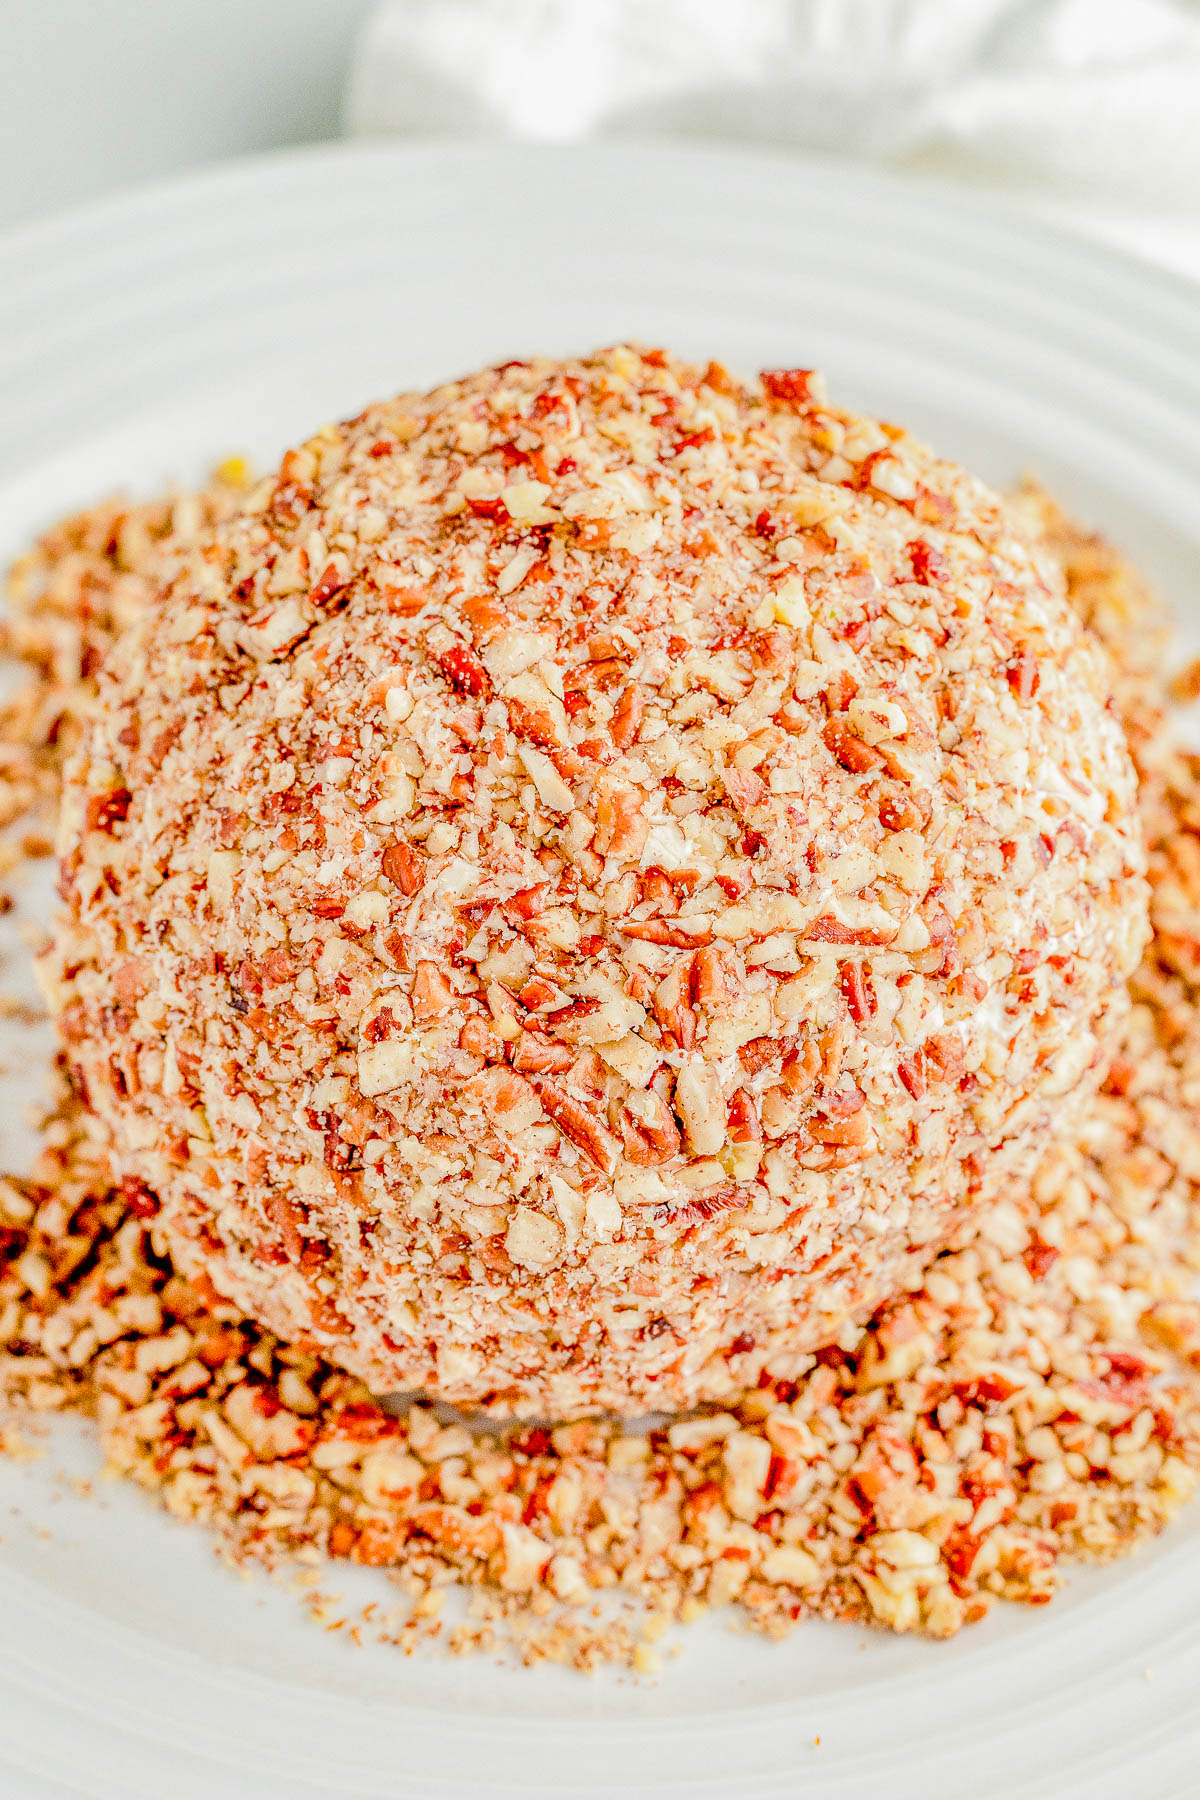 Pineapple Cheese Ball - An EASY holiday appetizer recipe that's a party favorite! Made with tangy cream cheese, juicy pineapple, green bell peppers, green onions, and plenty of nuts for lovely crunch and texture! It's a super simple dump-and-stir recipe with no baking, no cooking, no mixer, and no fuss! Serve this at Christmas parties, New Year's Eve, Super Bowl, and any time you need a guaranteed winner!